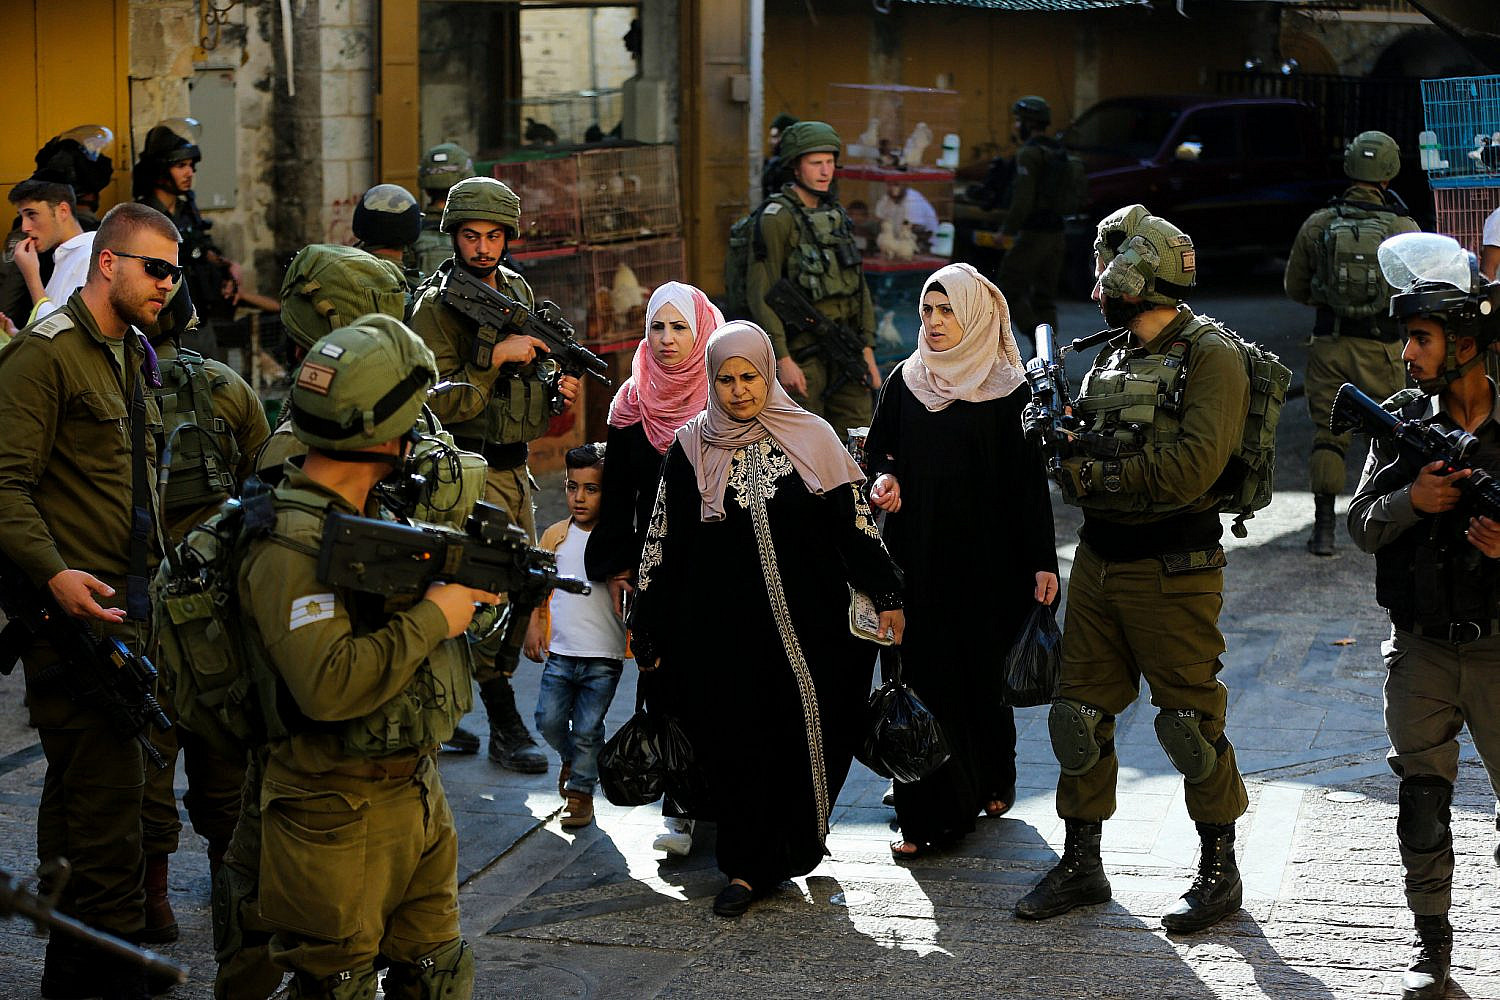 Israeli security forces guard as Jews tour the Palestinian side of the Old City Market in the West Bank city of Hebron, June 15, 2019. (Wisam Hashlamoun/Flash90)